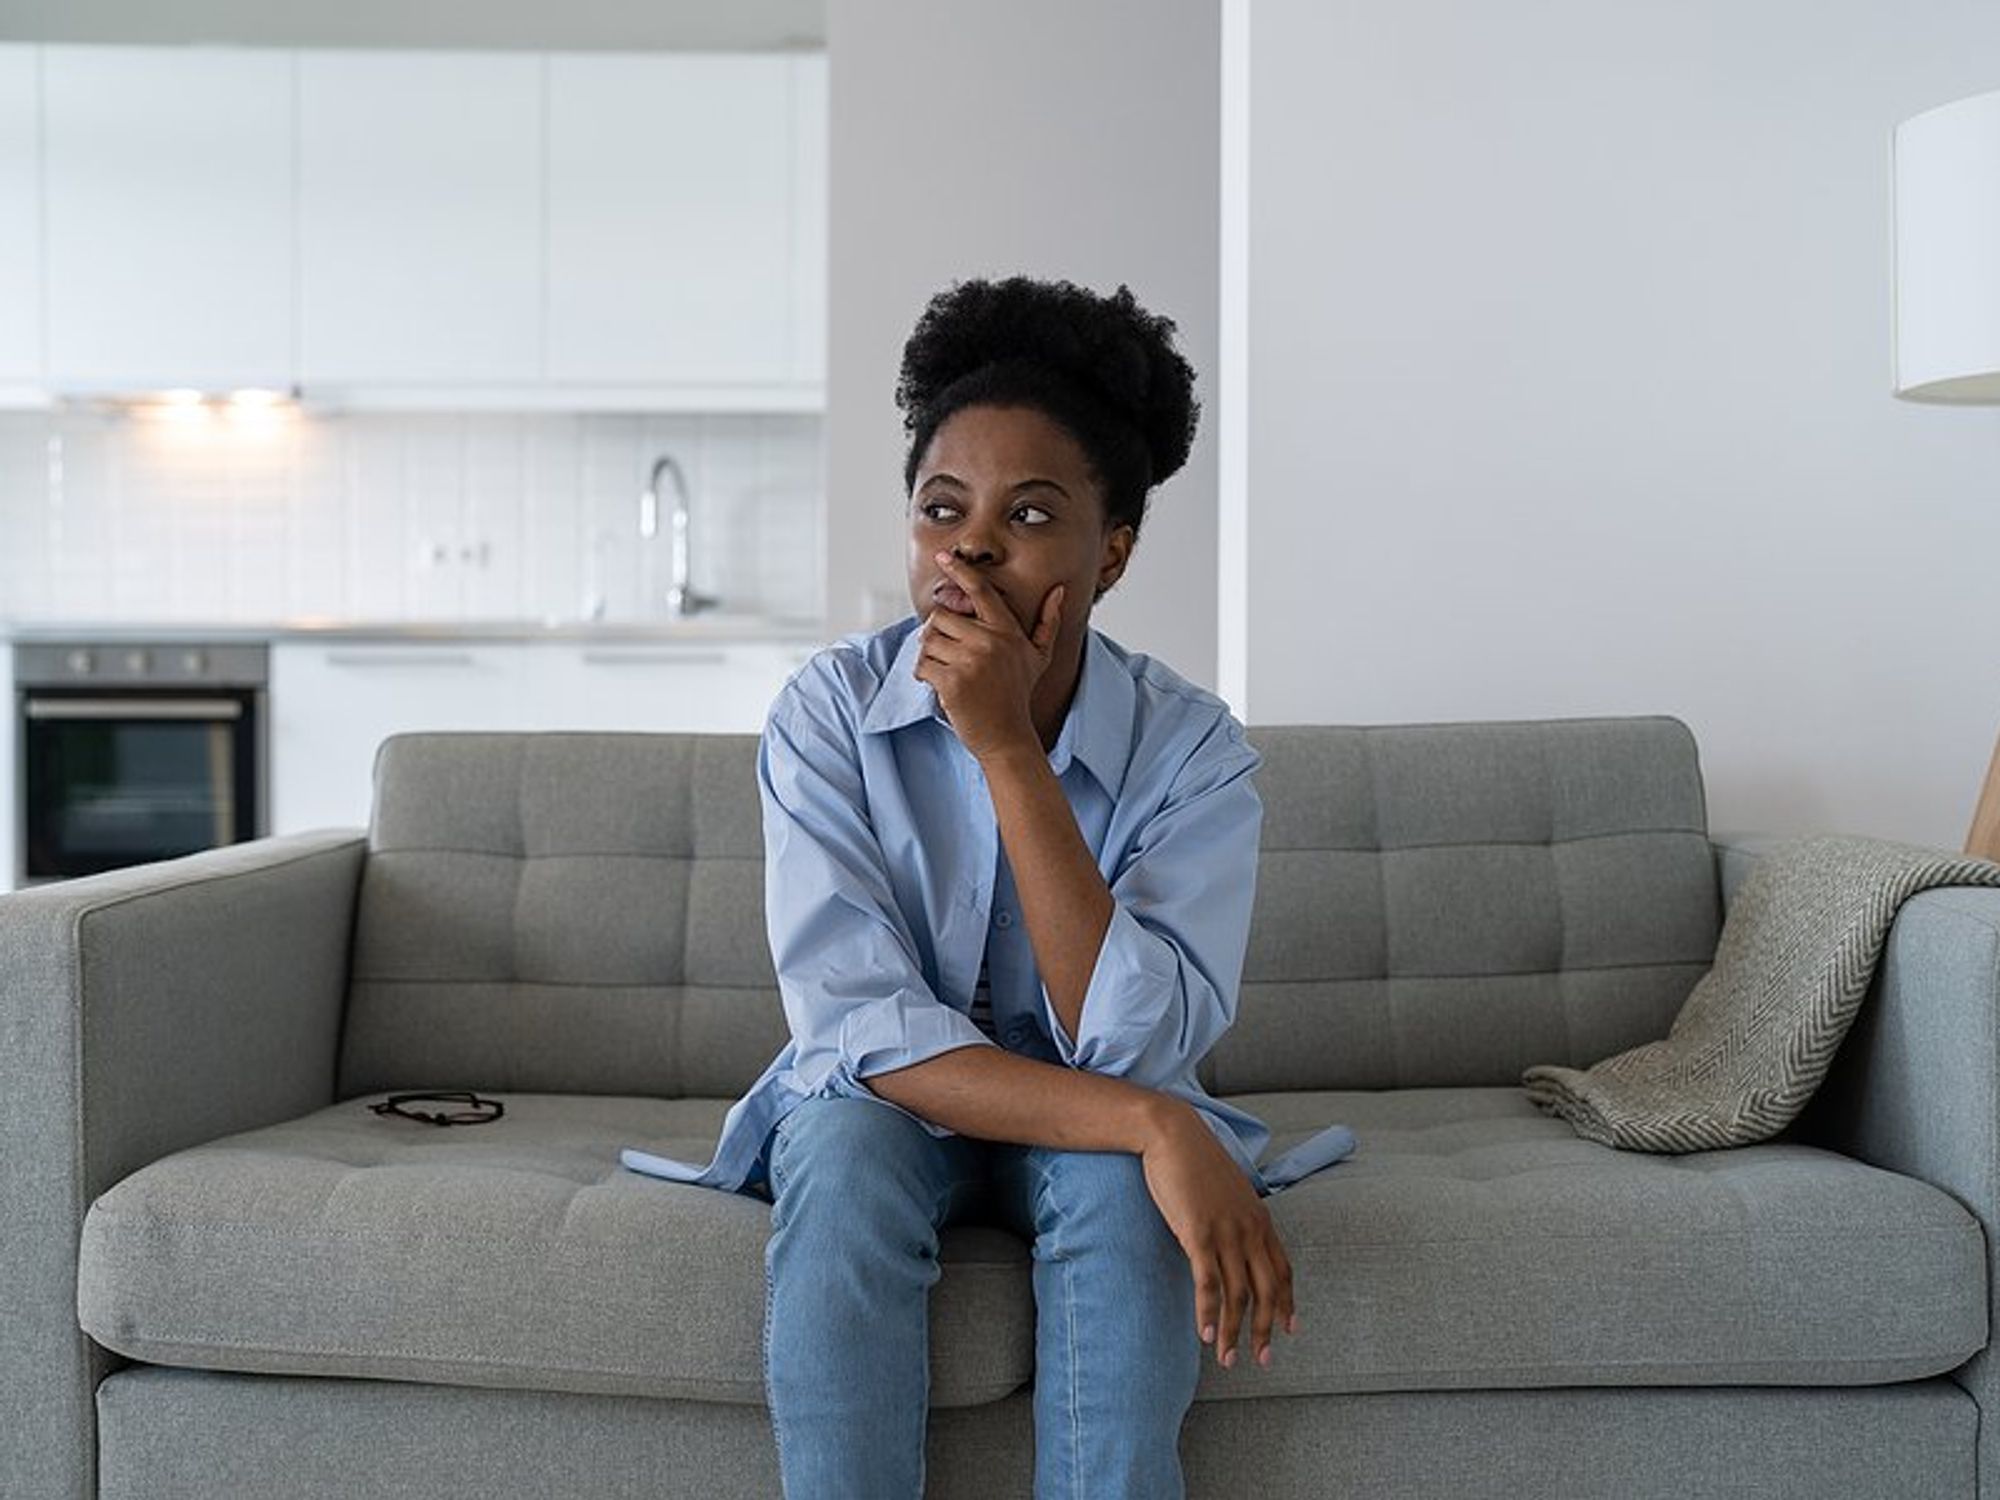 Woman sitting on couch thinks about and fears getting laid off